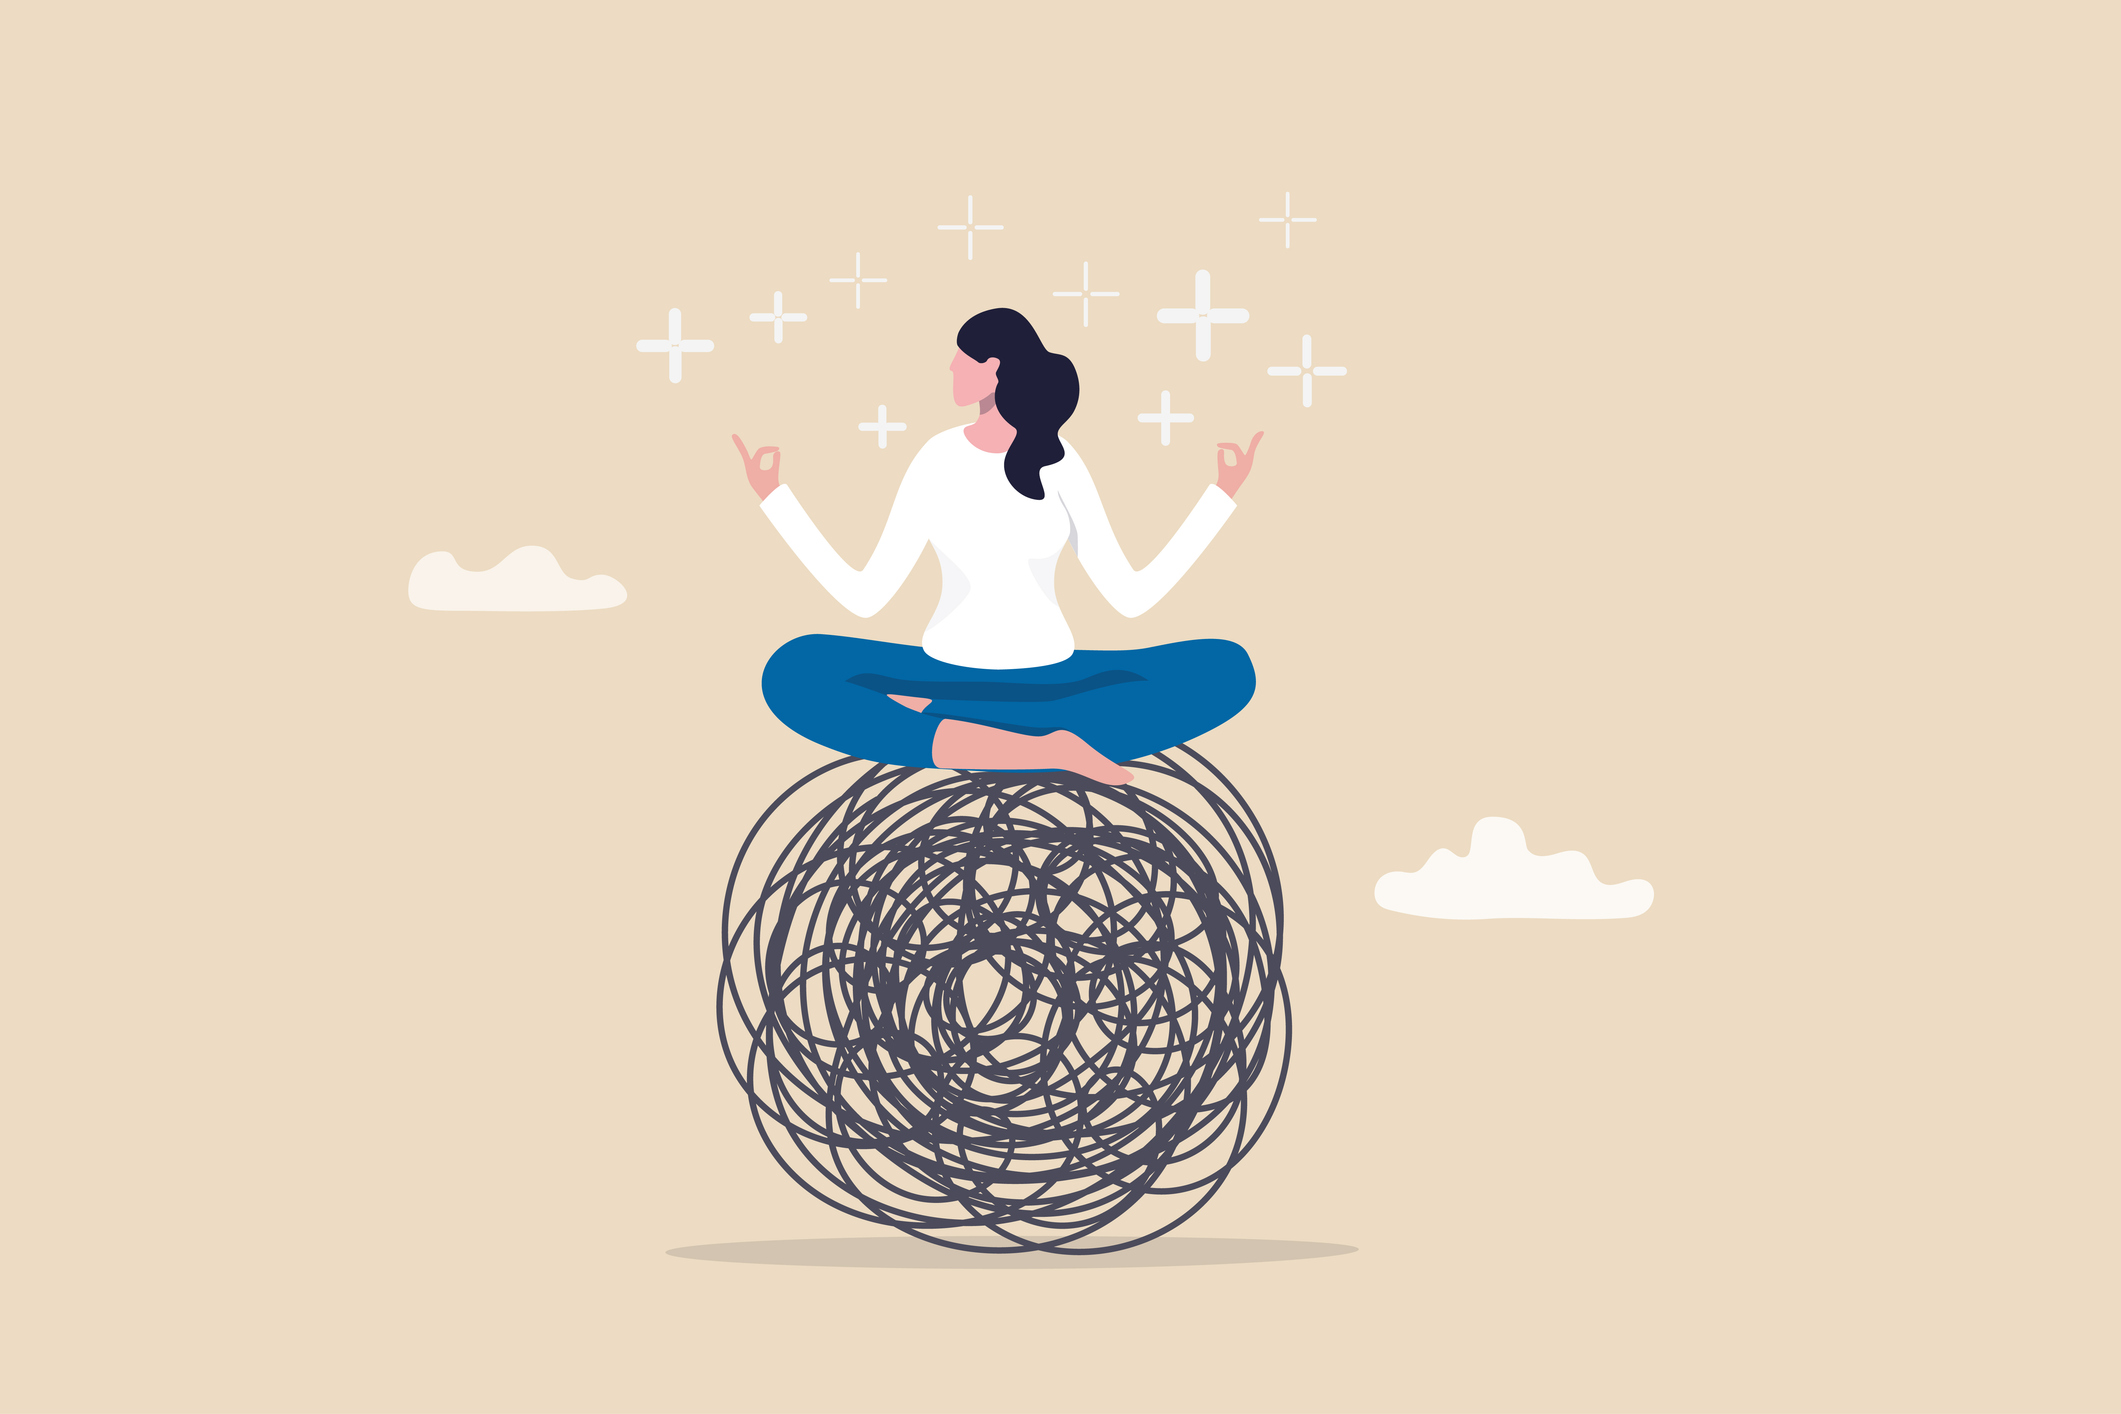 An illustration showing a balanced approach to stress